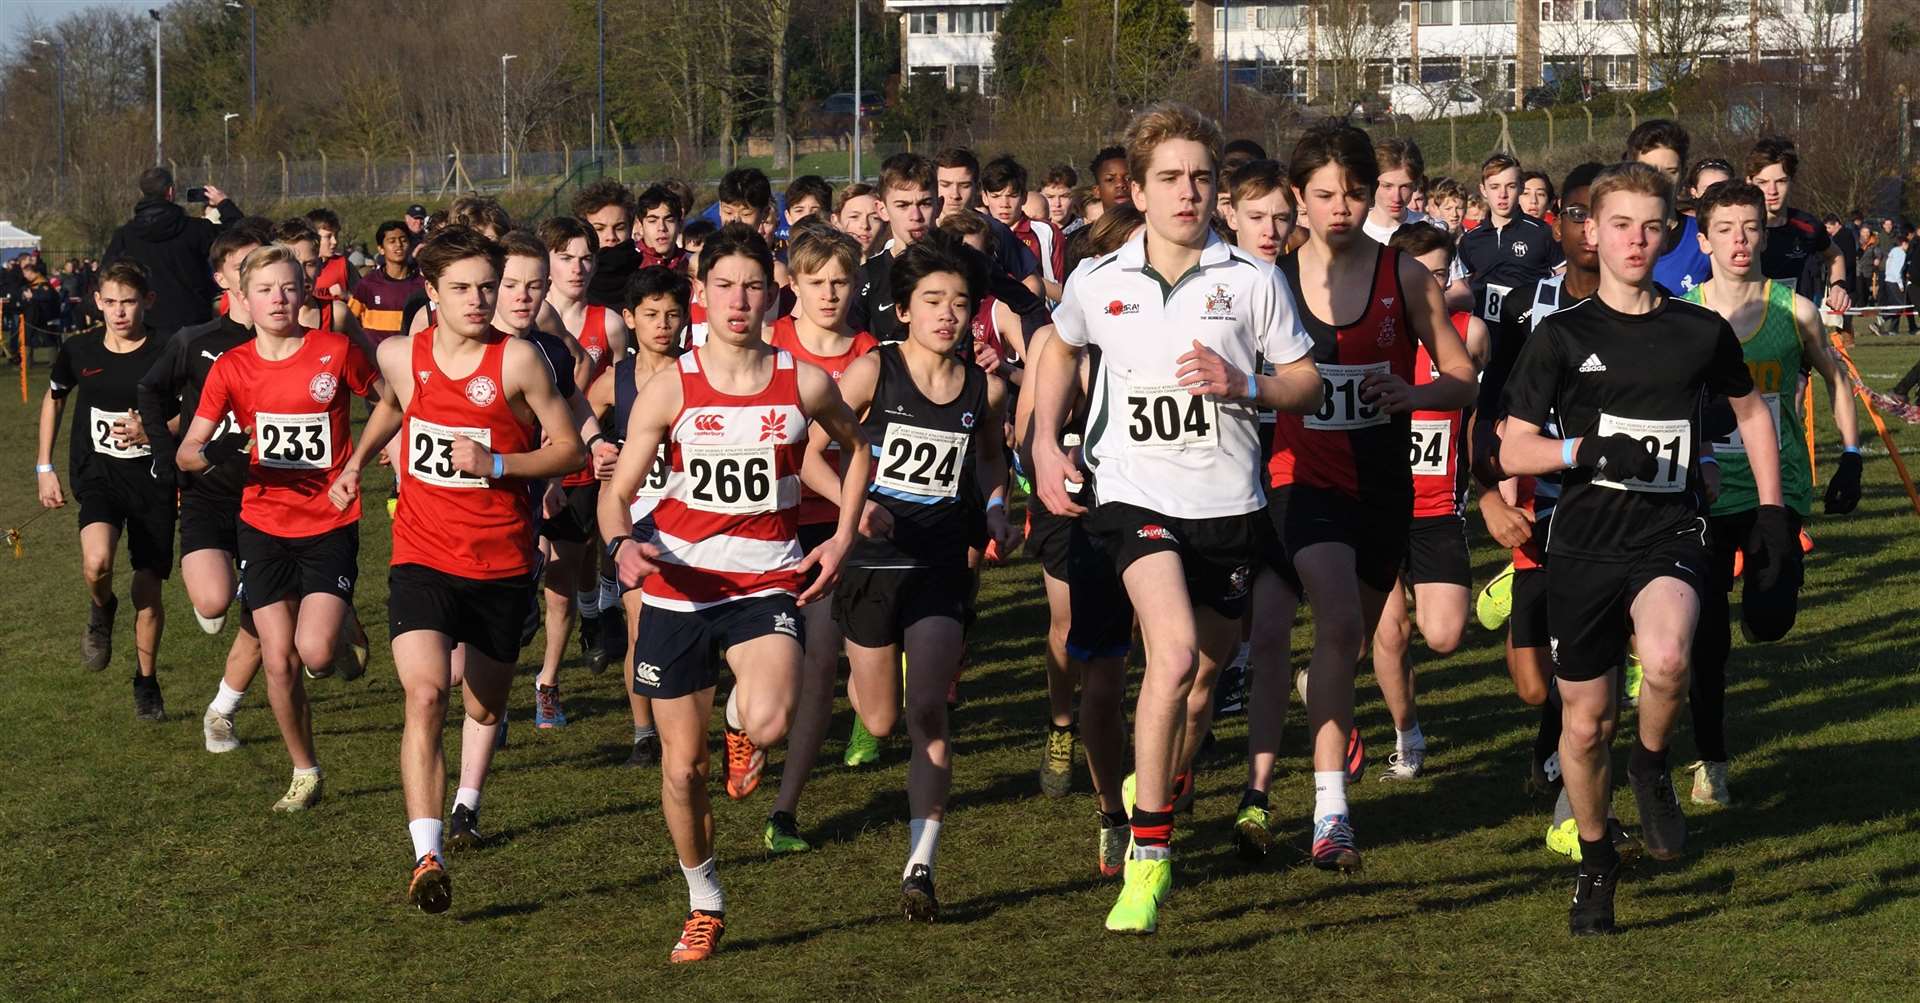 The junior boys jostle for position at the start of their race. Picture: Simon Hildrew (62006282)